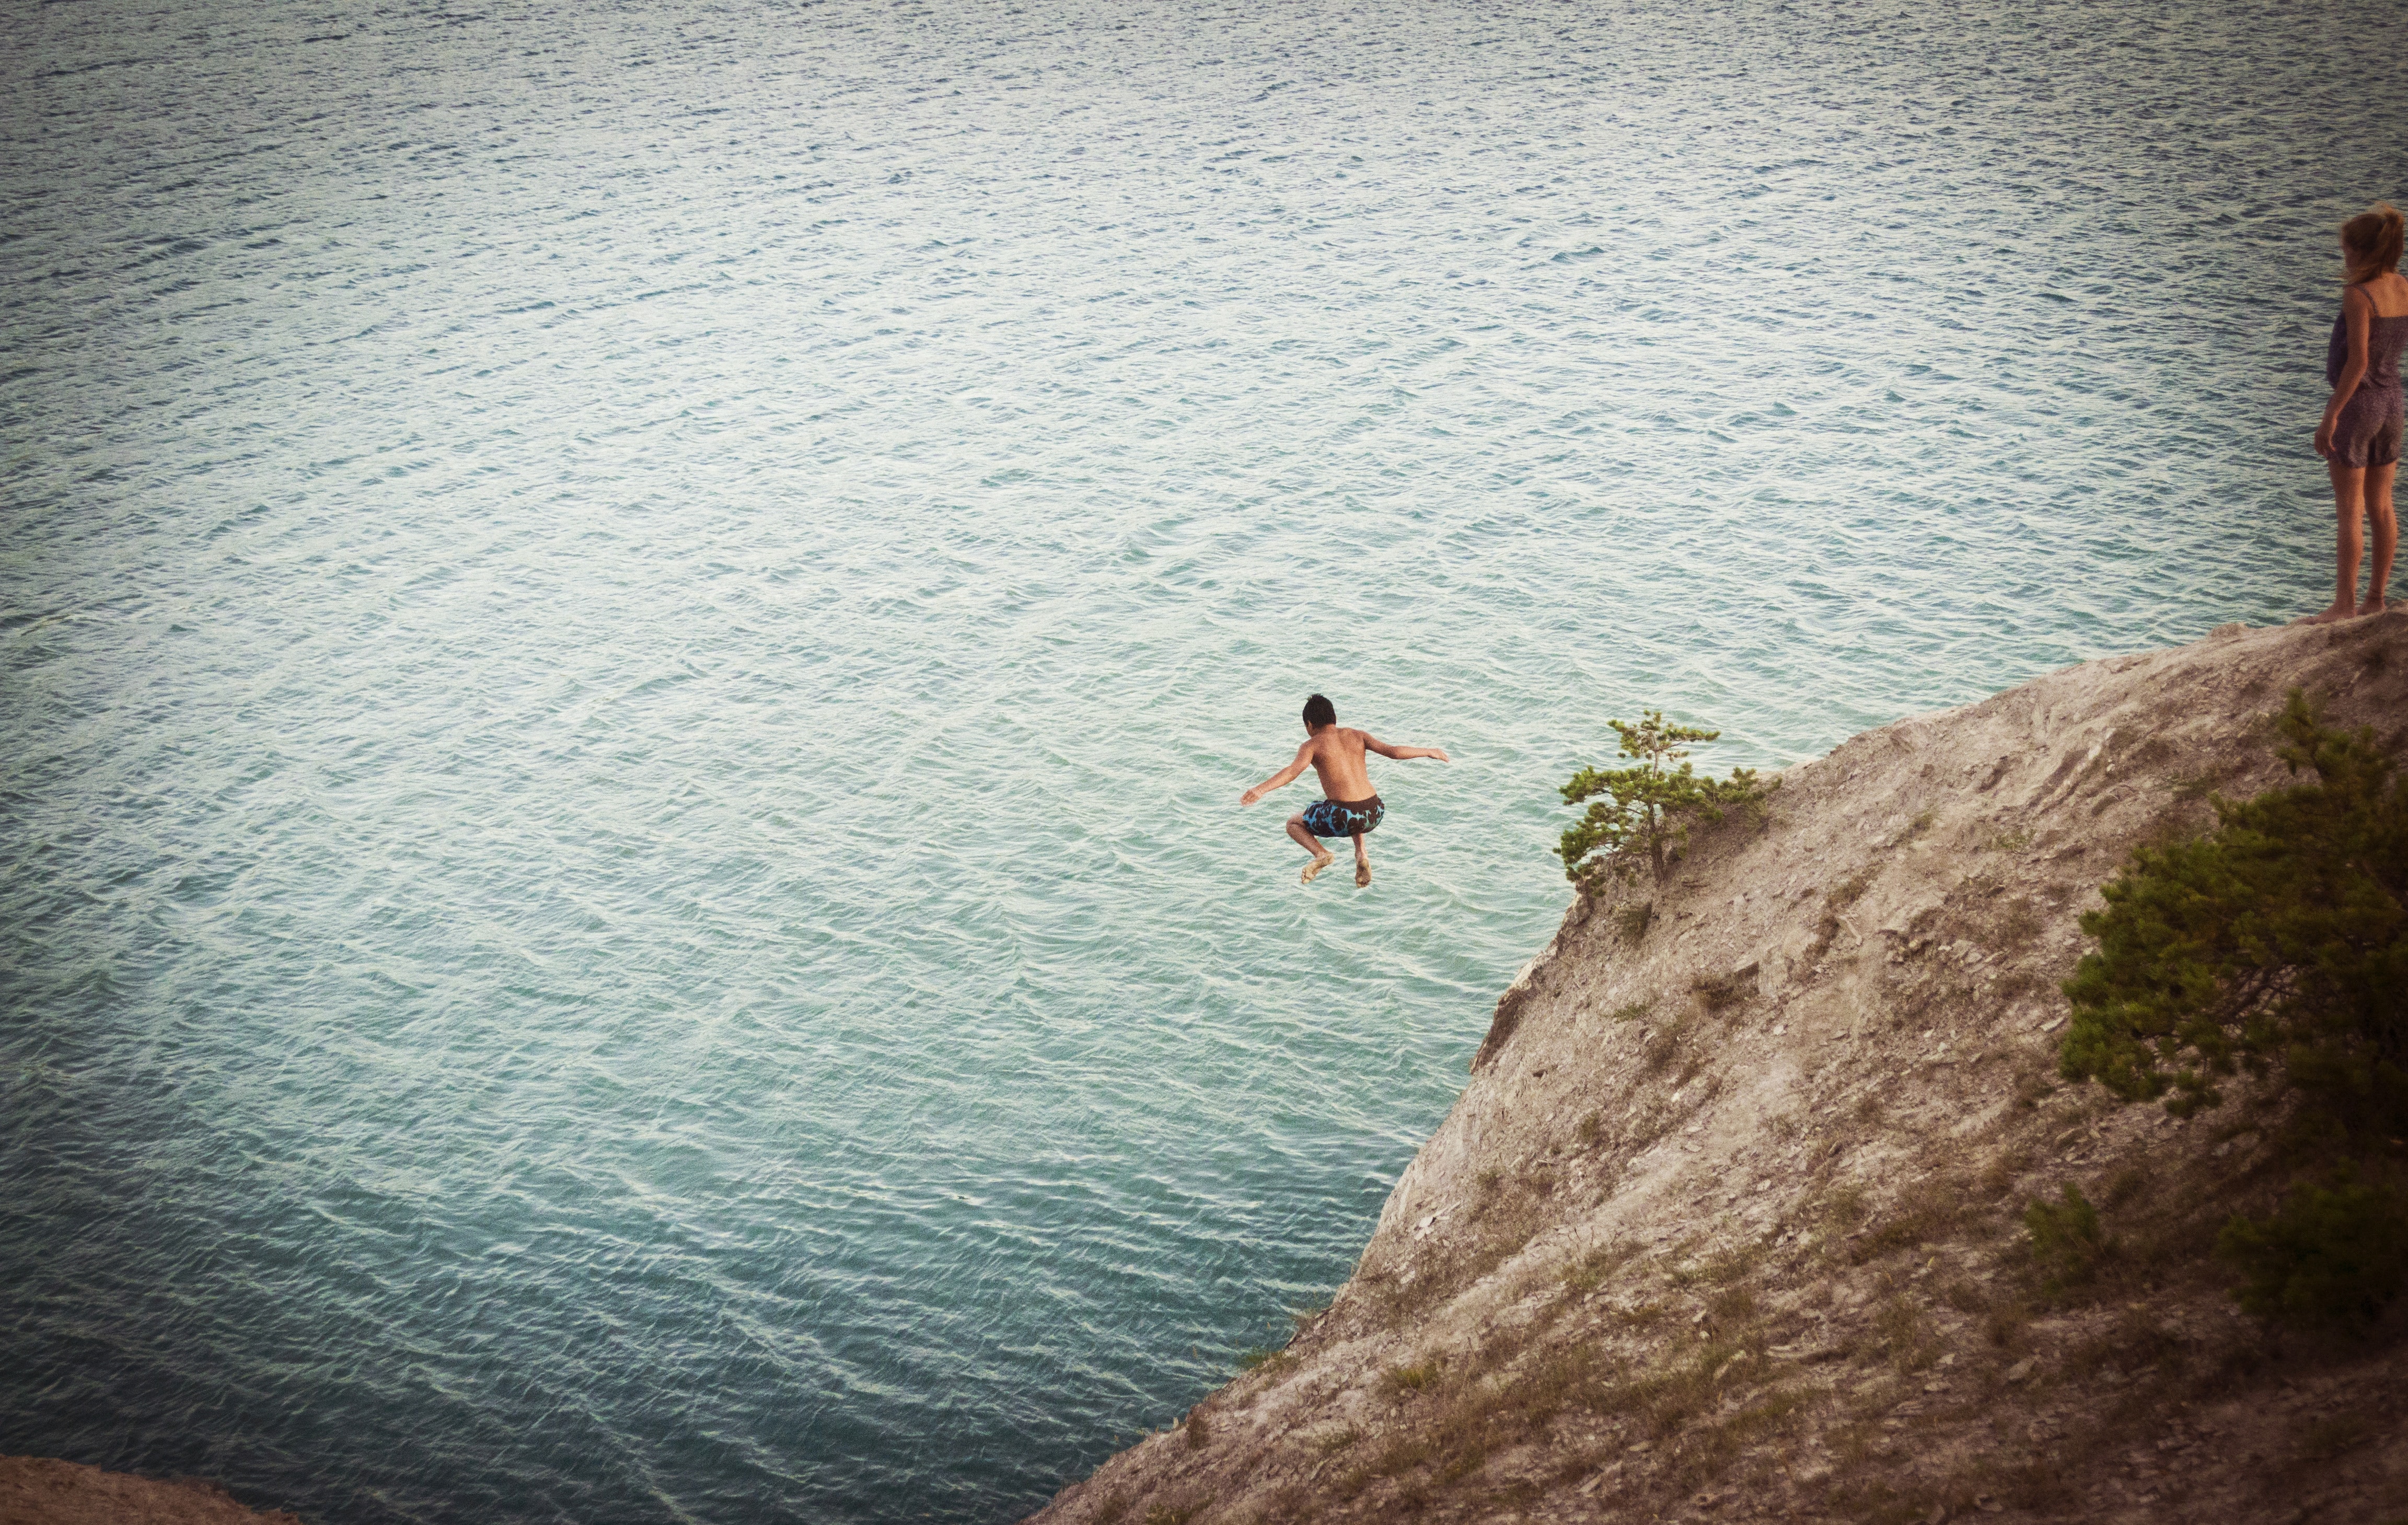 Man jumping into water from cliff